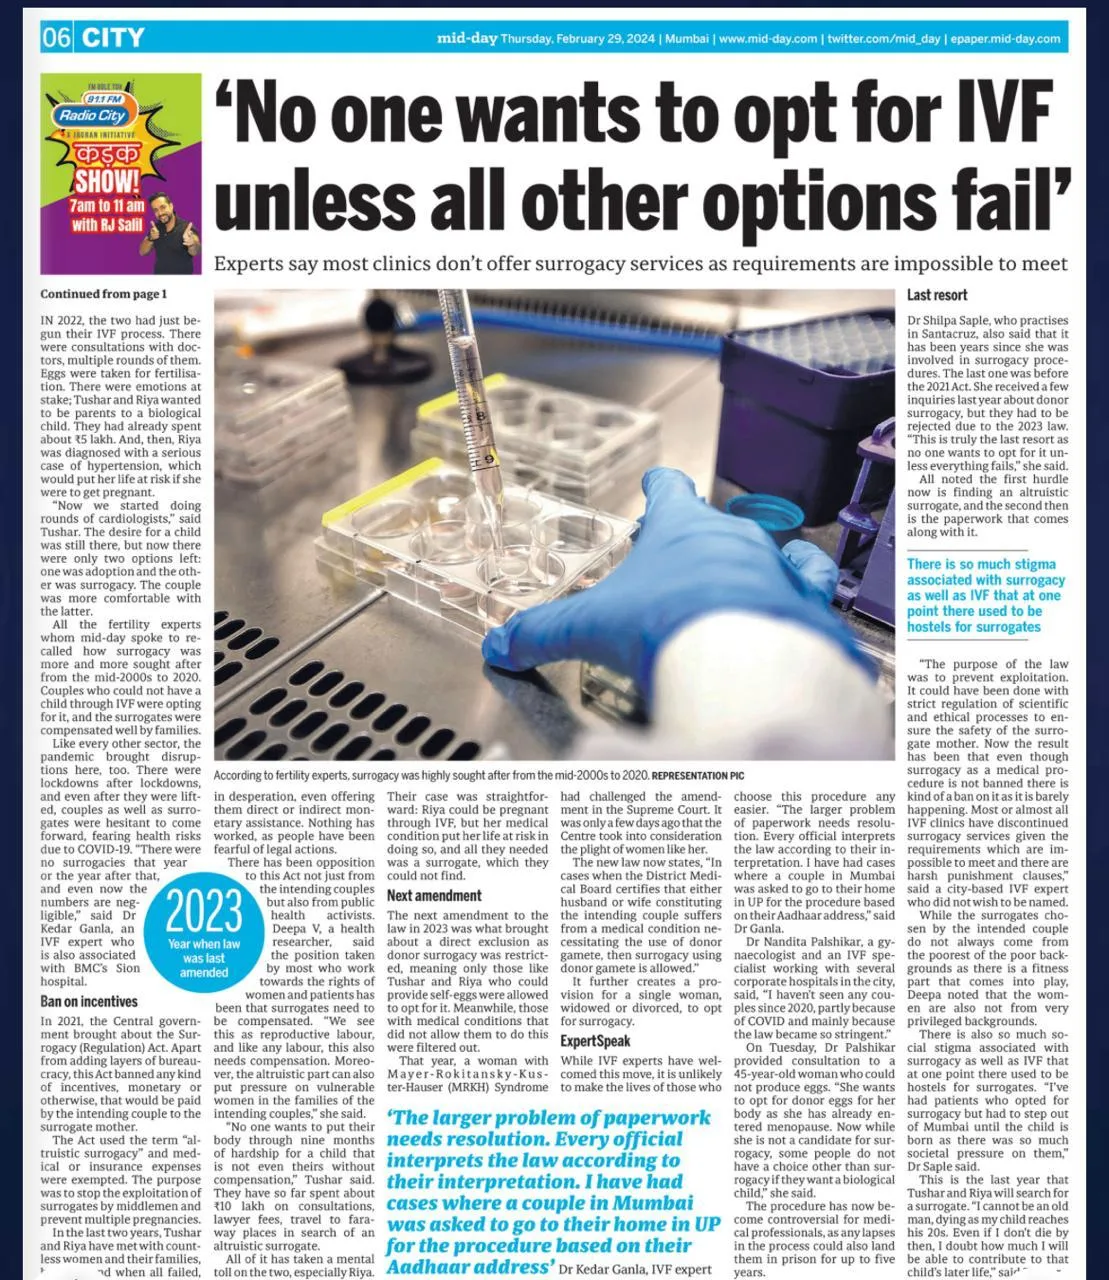 No one wants to opt for IVF unless all other options fail.